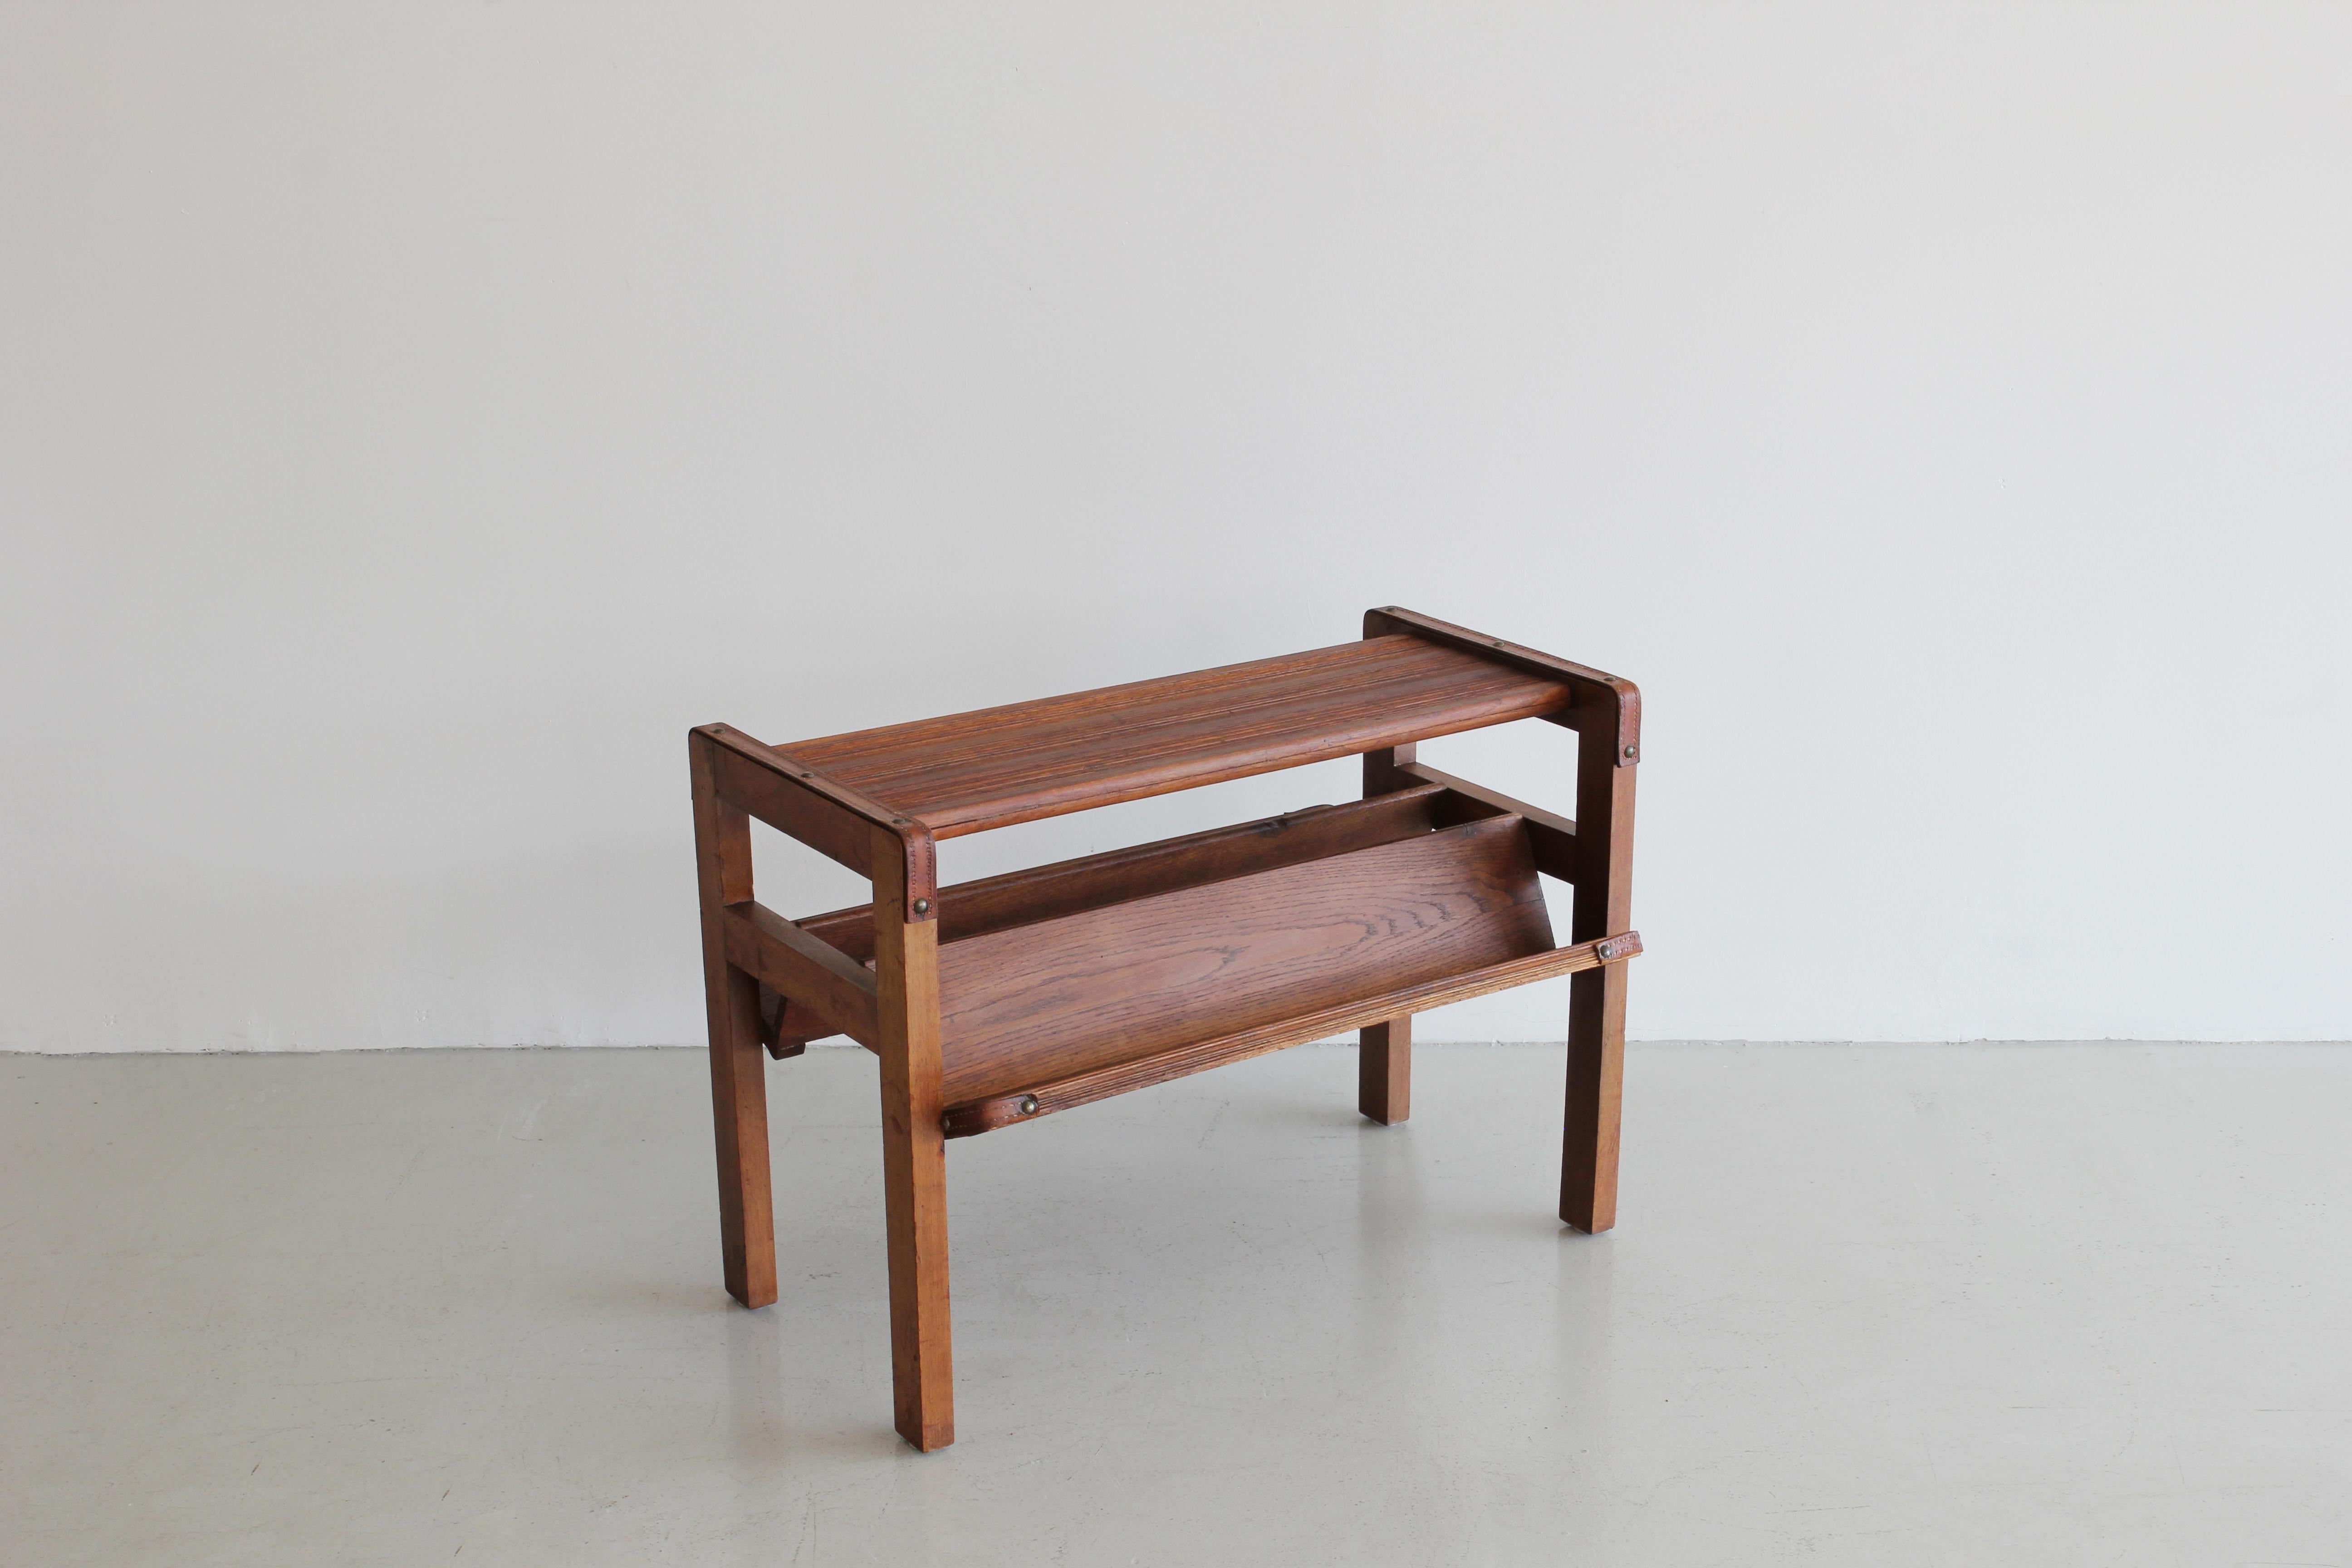 Handsome oak magazine table by Jacques Adnet. Rectangular form with slatted grooved top, inverted 